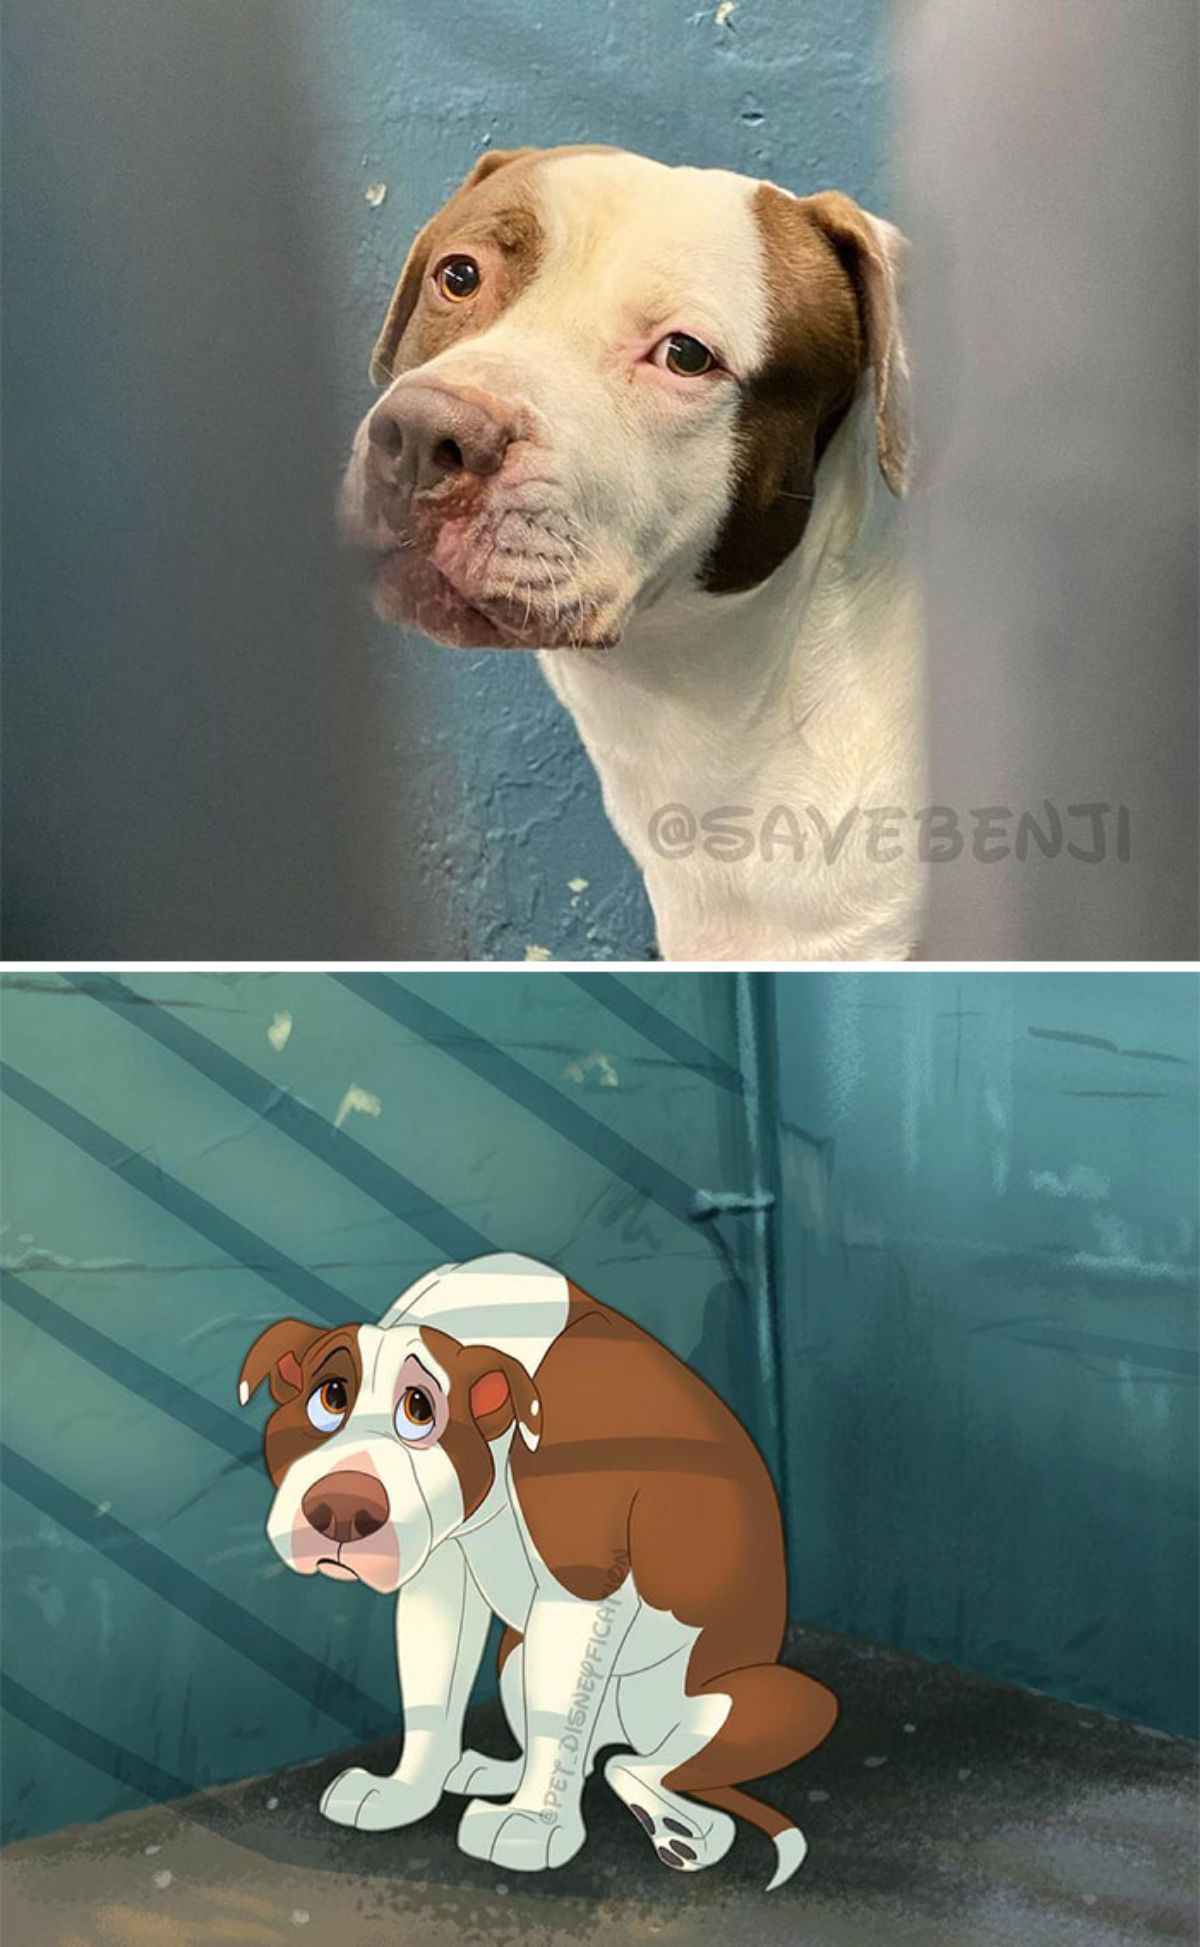 real photo and cartoon image of a brown and white dog slumped in a corner of a cage